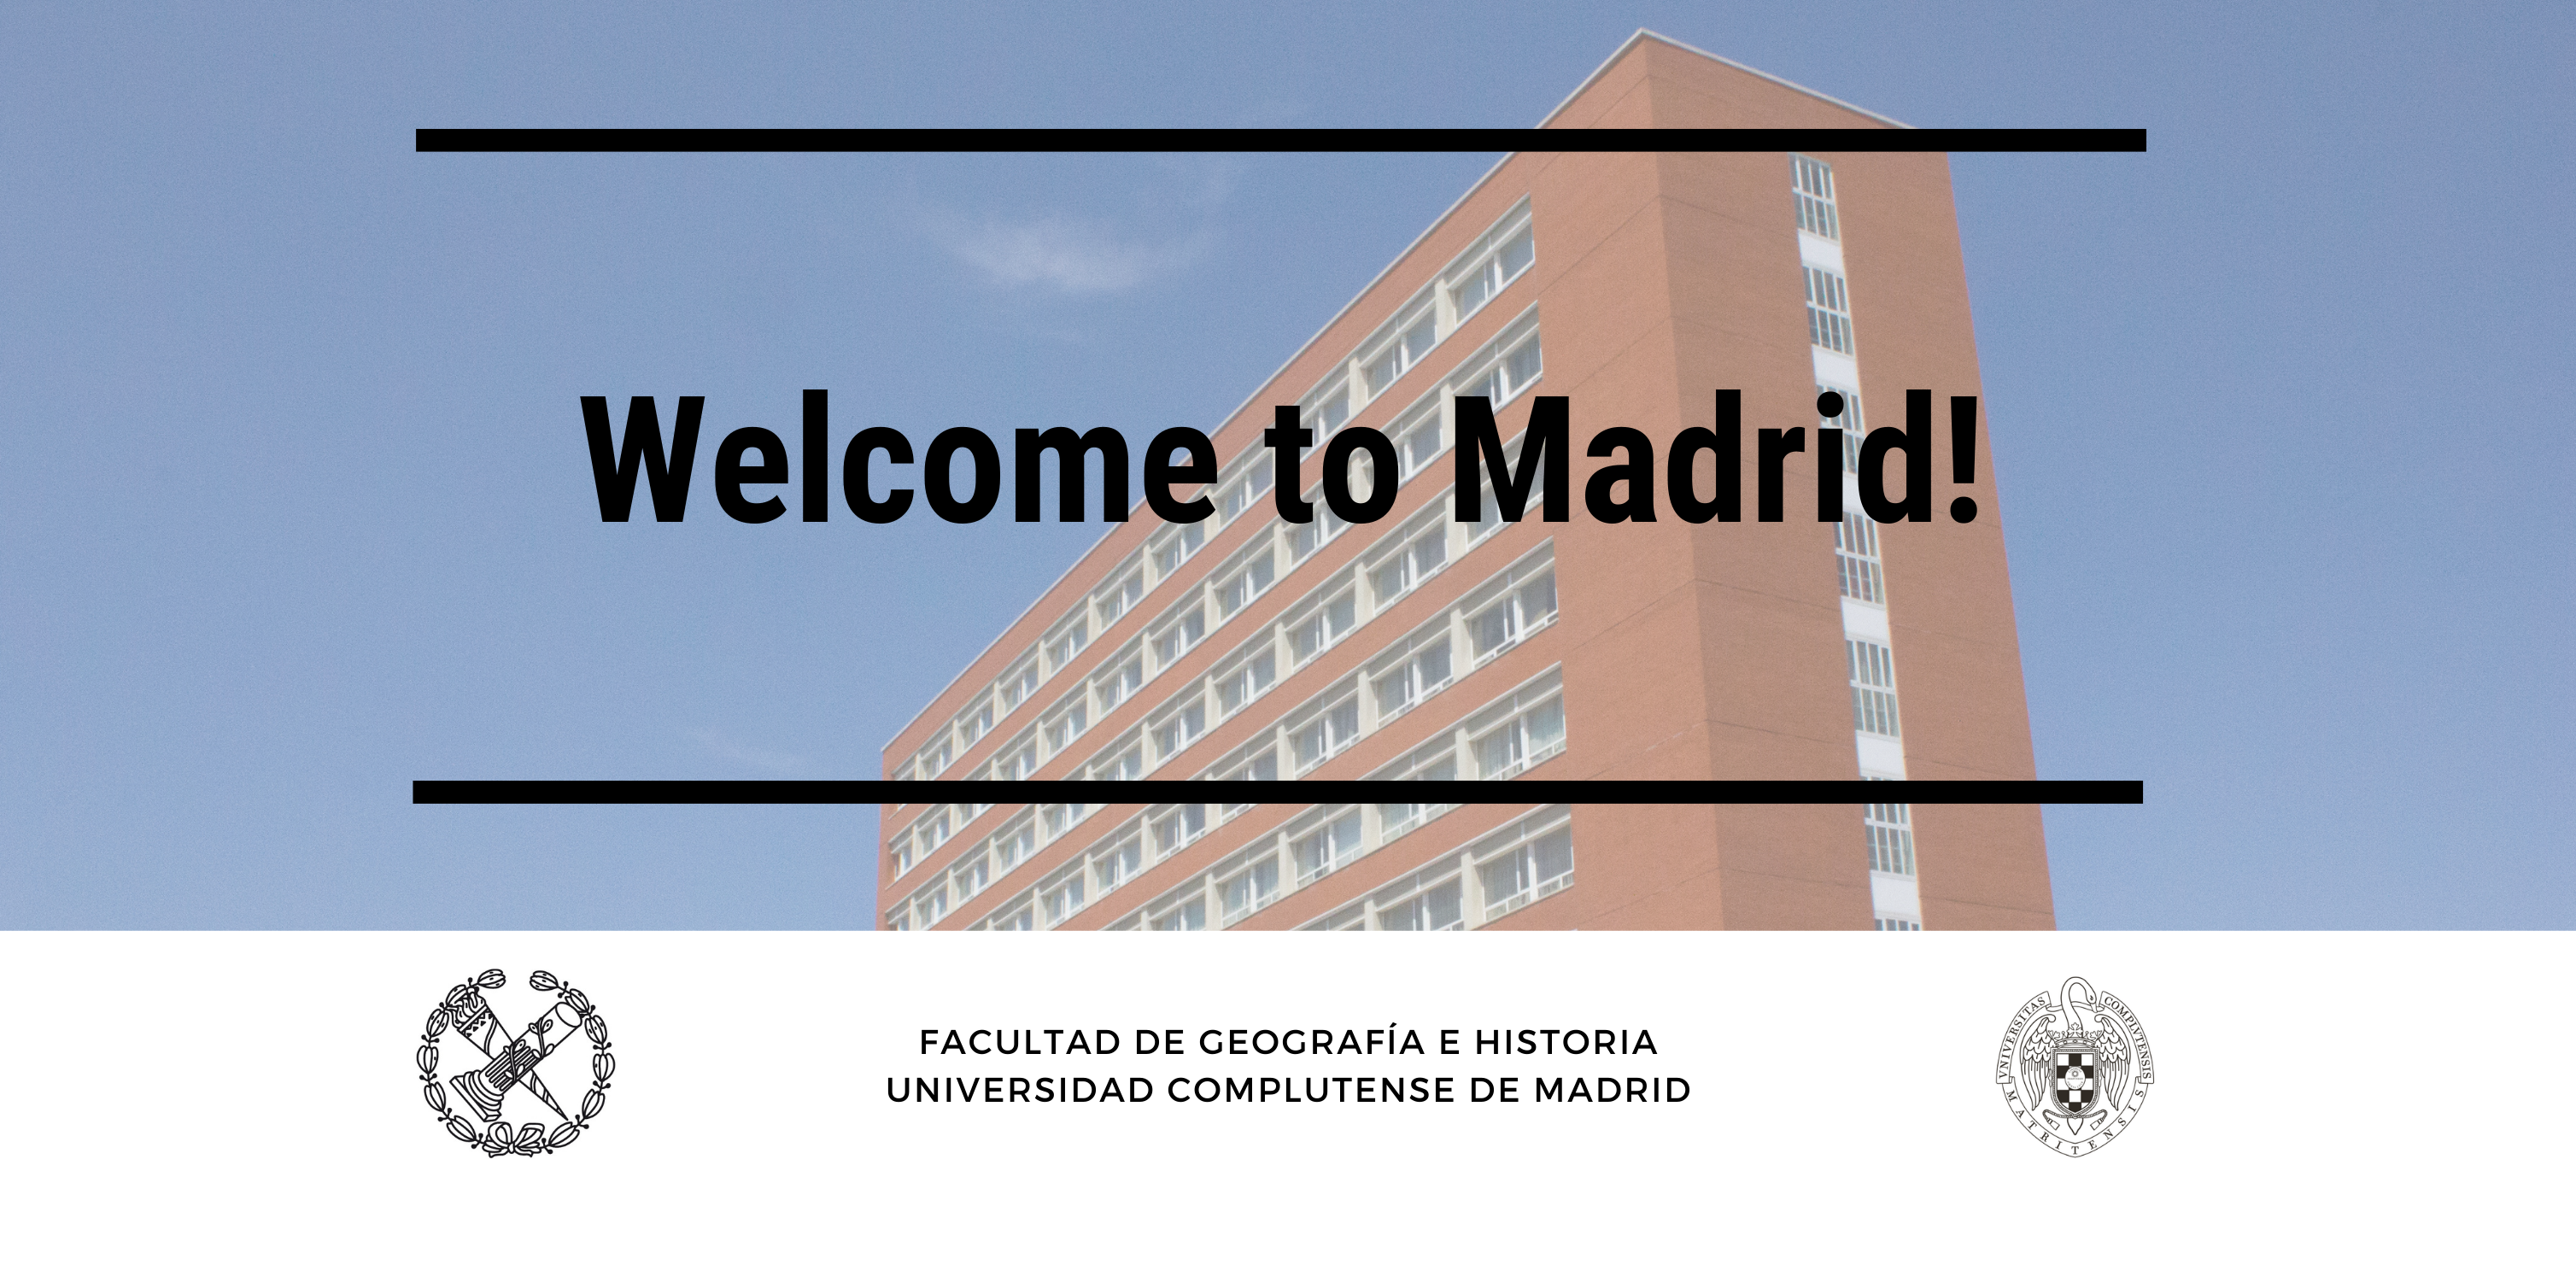 Welcome to Madrid!